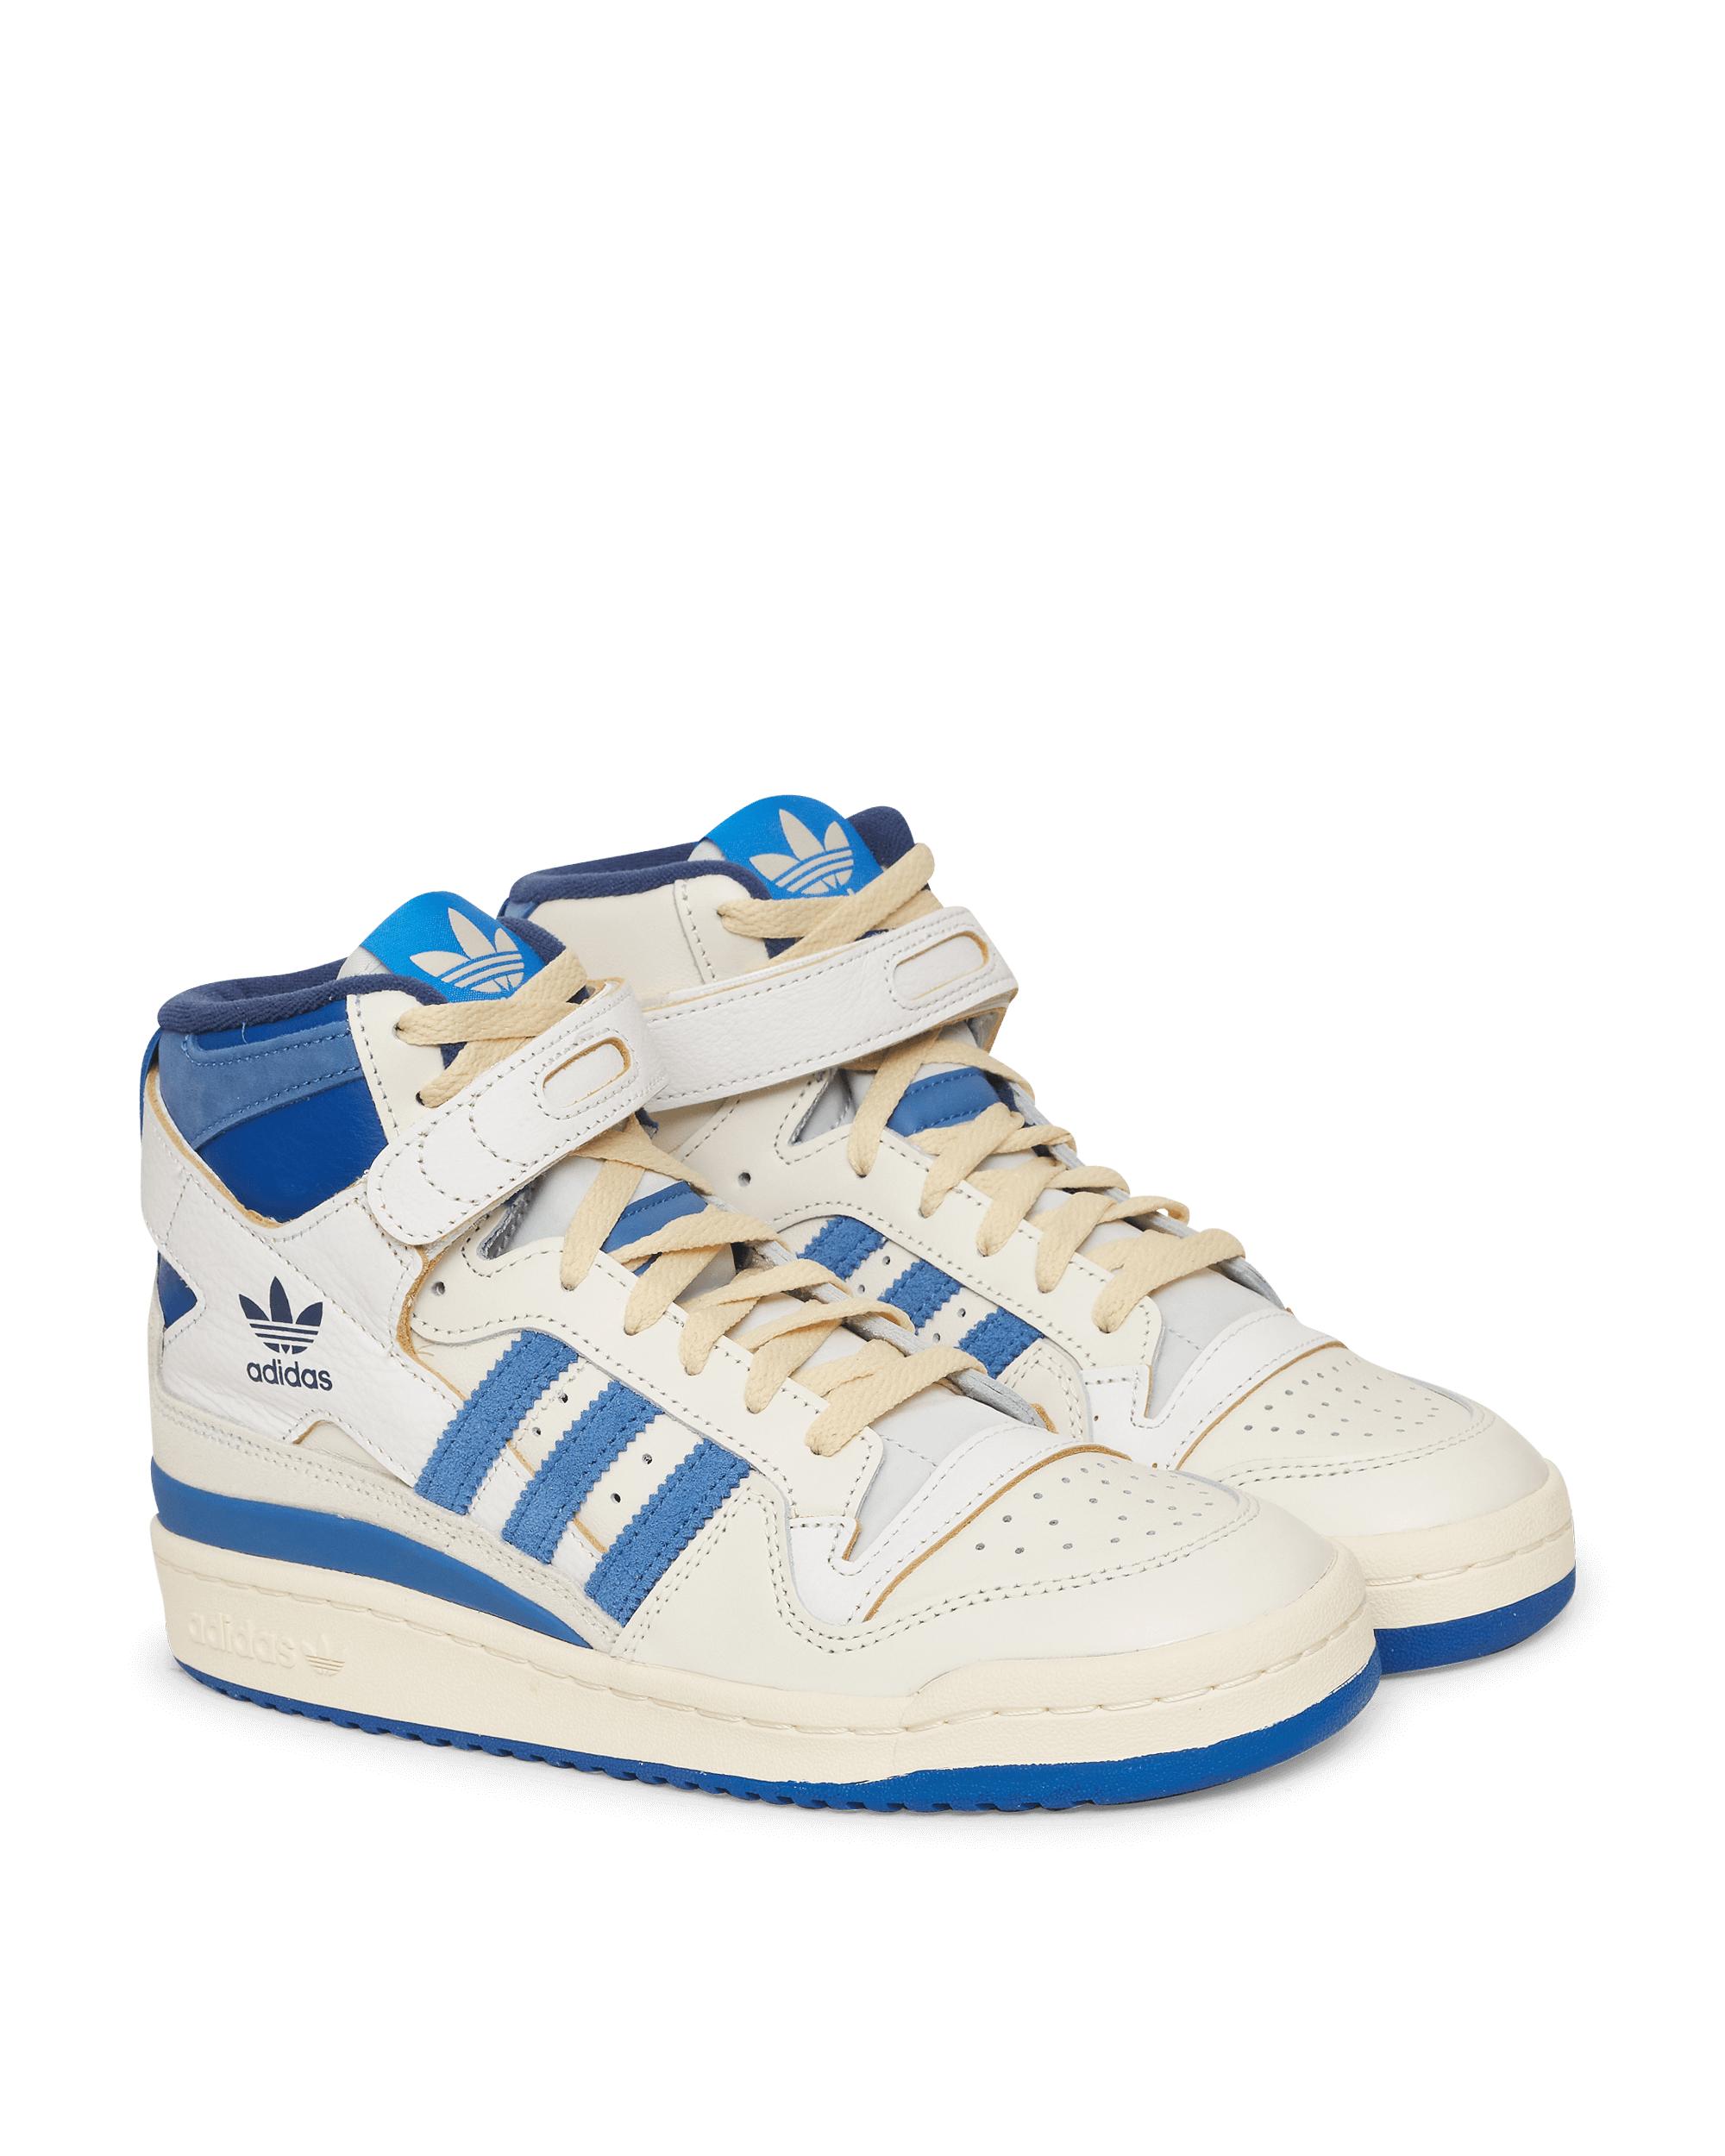 adidas Originals Leather Forum 84 High Blue Thread Sneakers for Men | Lyst